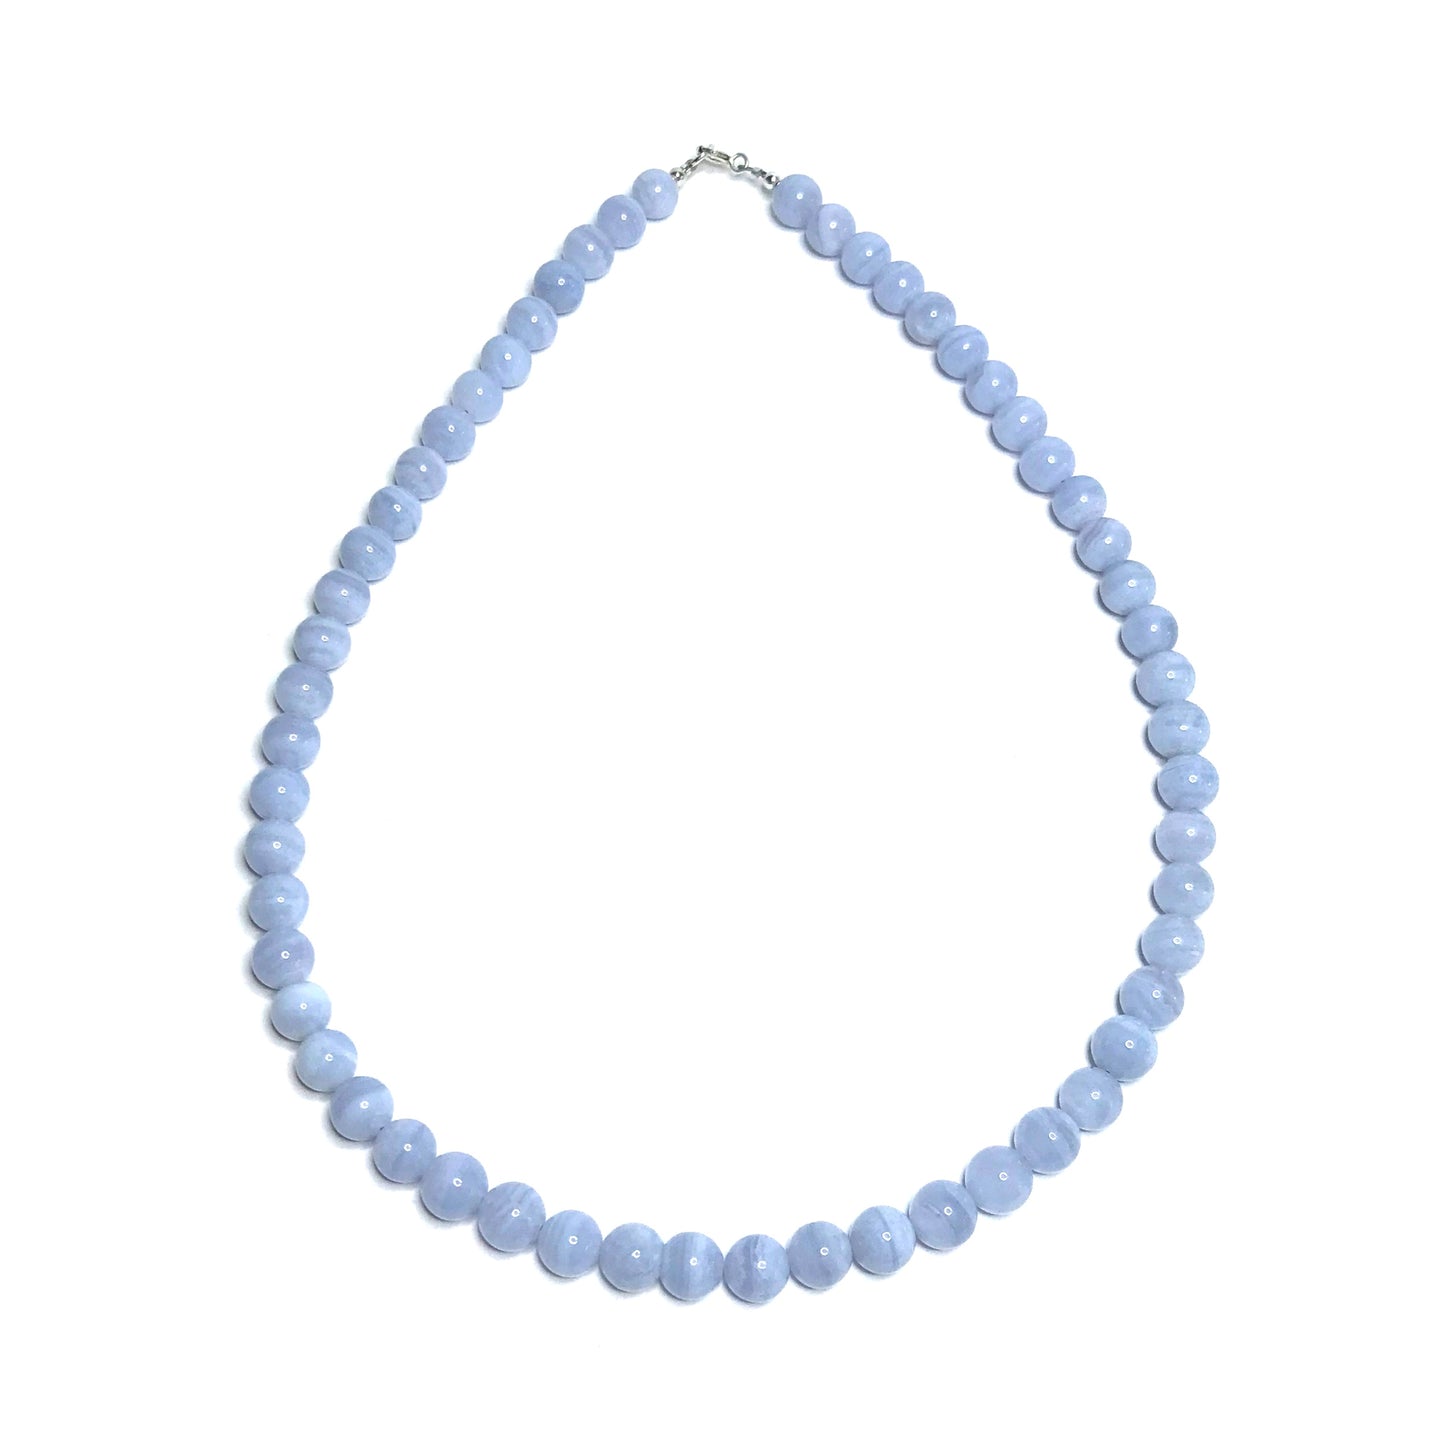 Blue lace agate crystal necklace